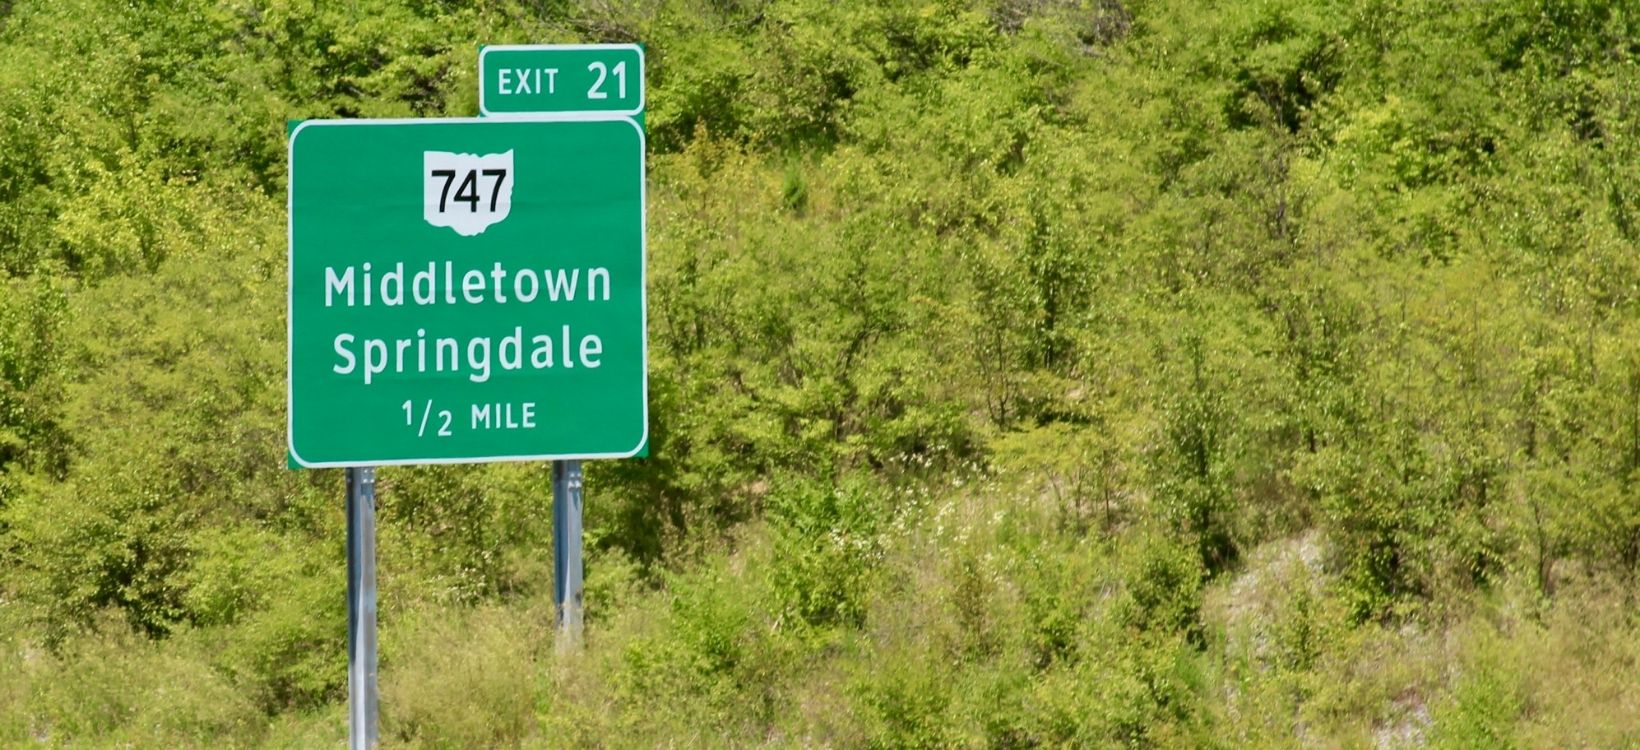 Highway signs are a great way to tell roadside assistance operators where you're located in the event of a breakdown.